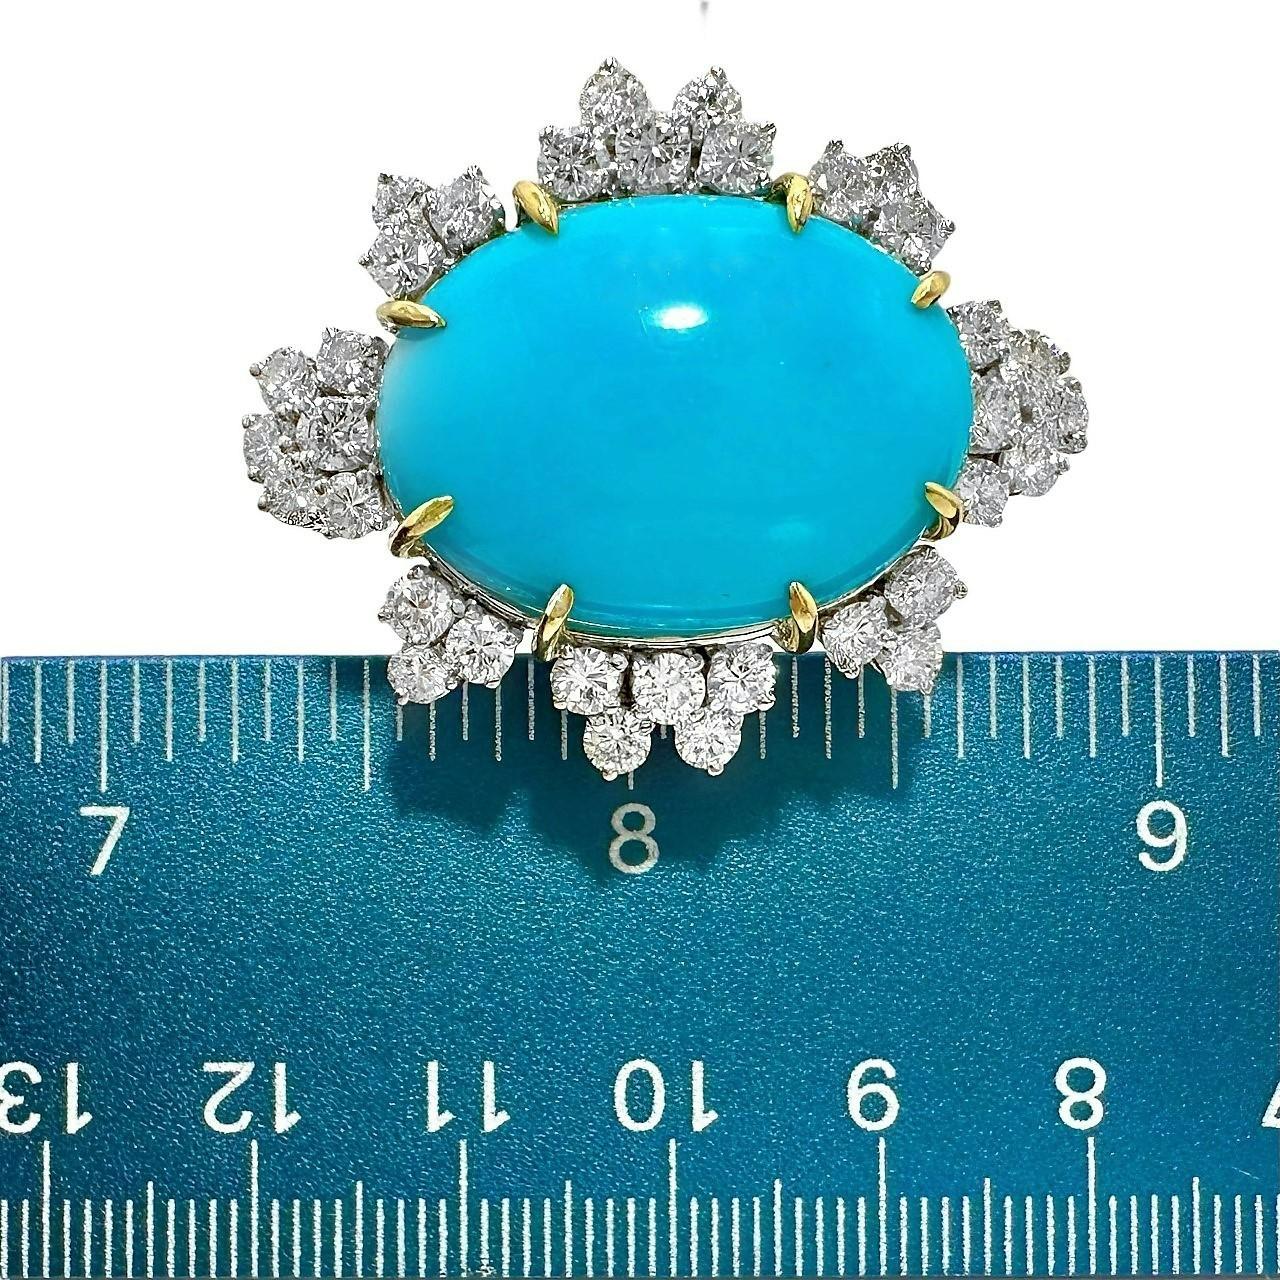 Magnificent Mid-20th Century Turquoise, Diamond and Platinum Cocktail Ring For Sale 4